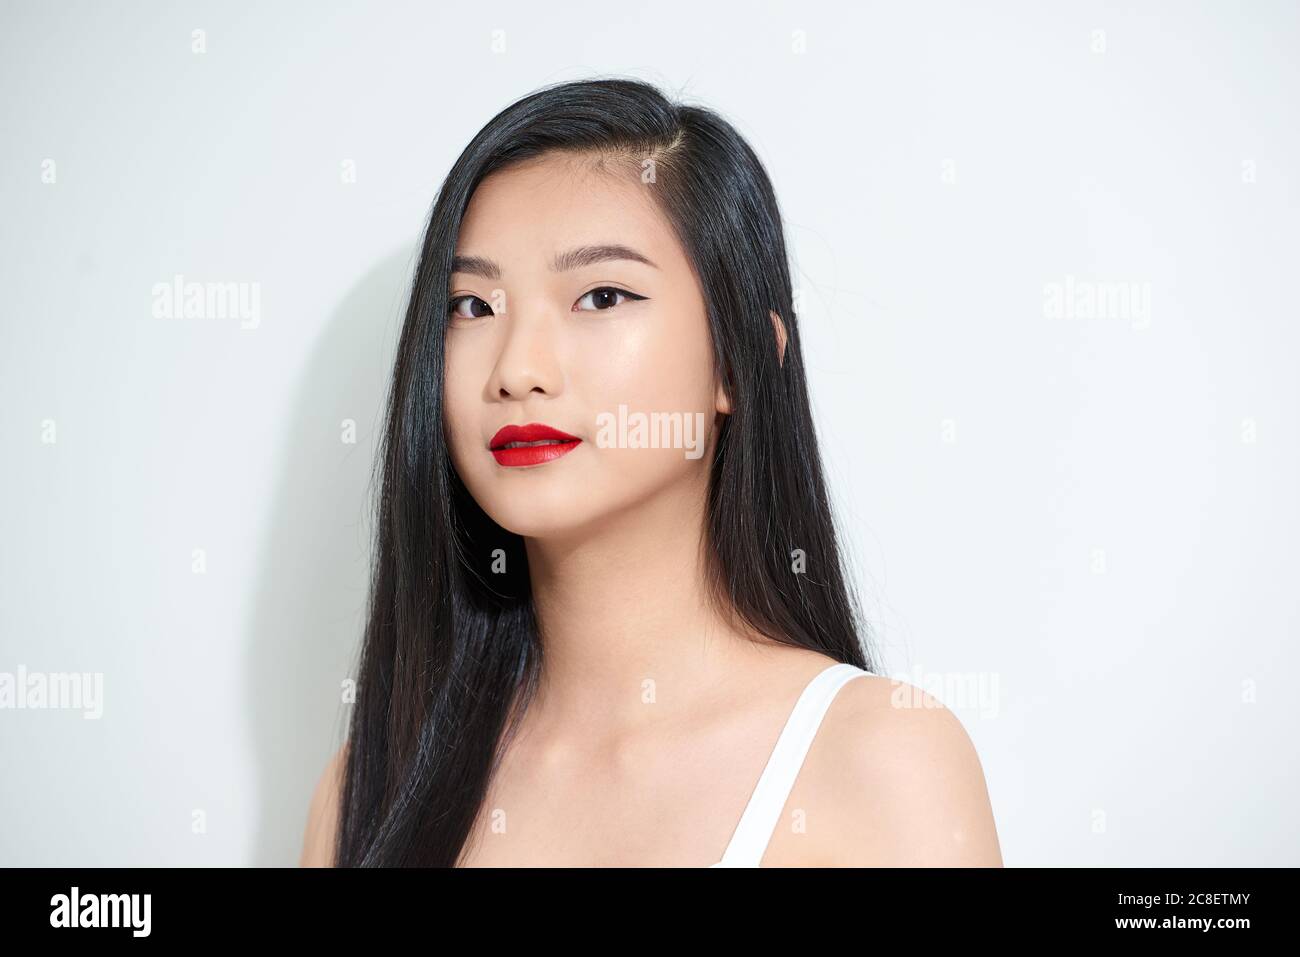 portrait of a beautiful asian girl with a serious face Stock Photo